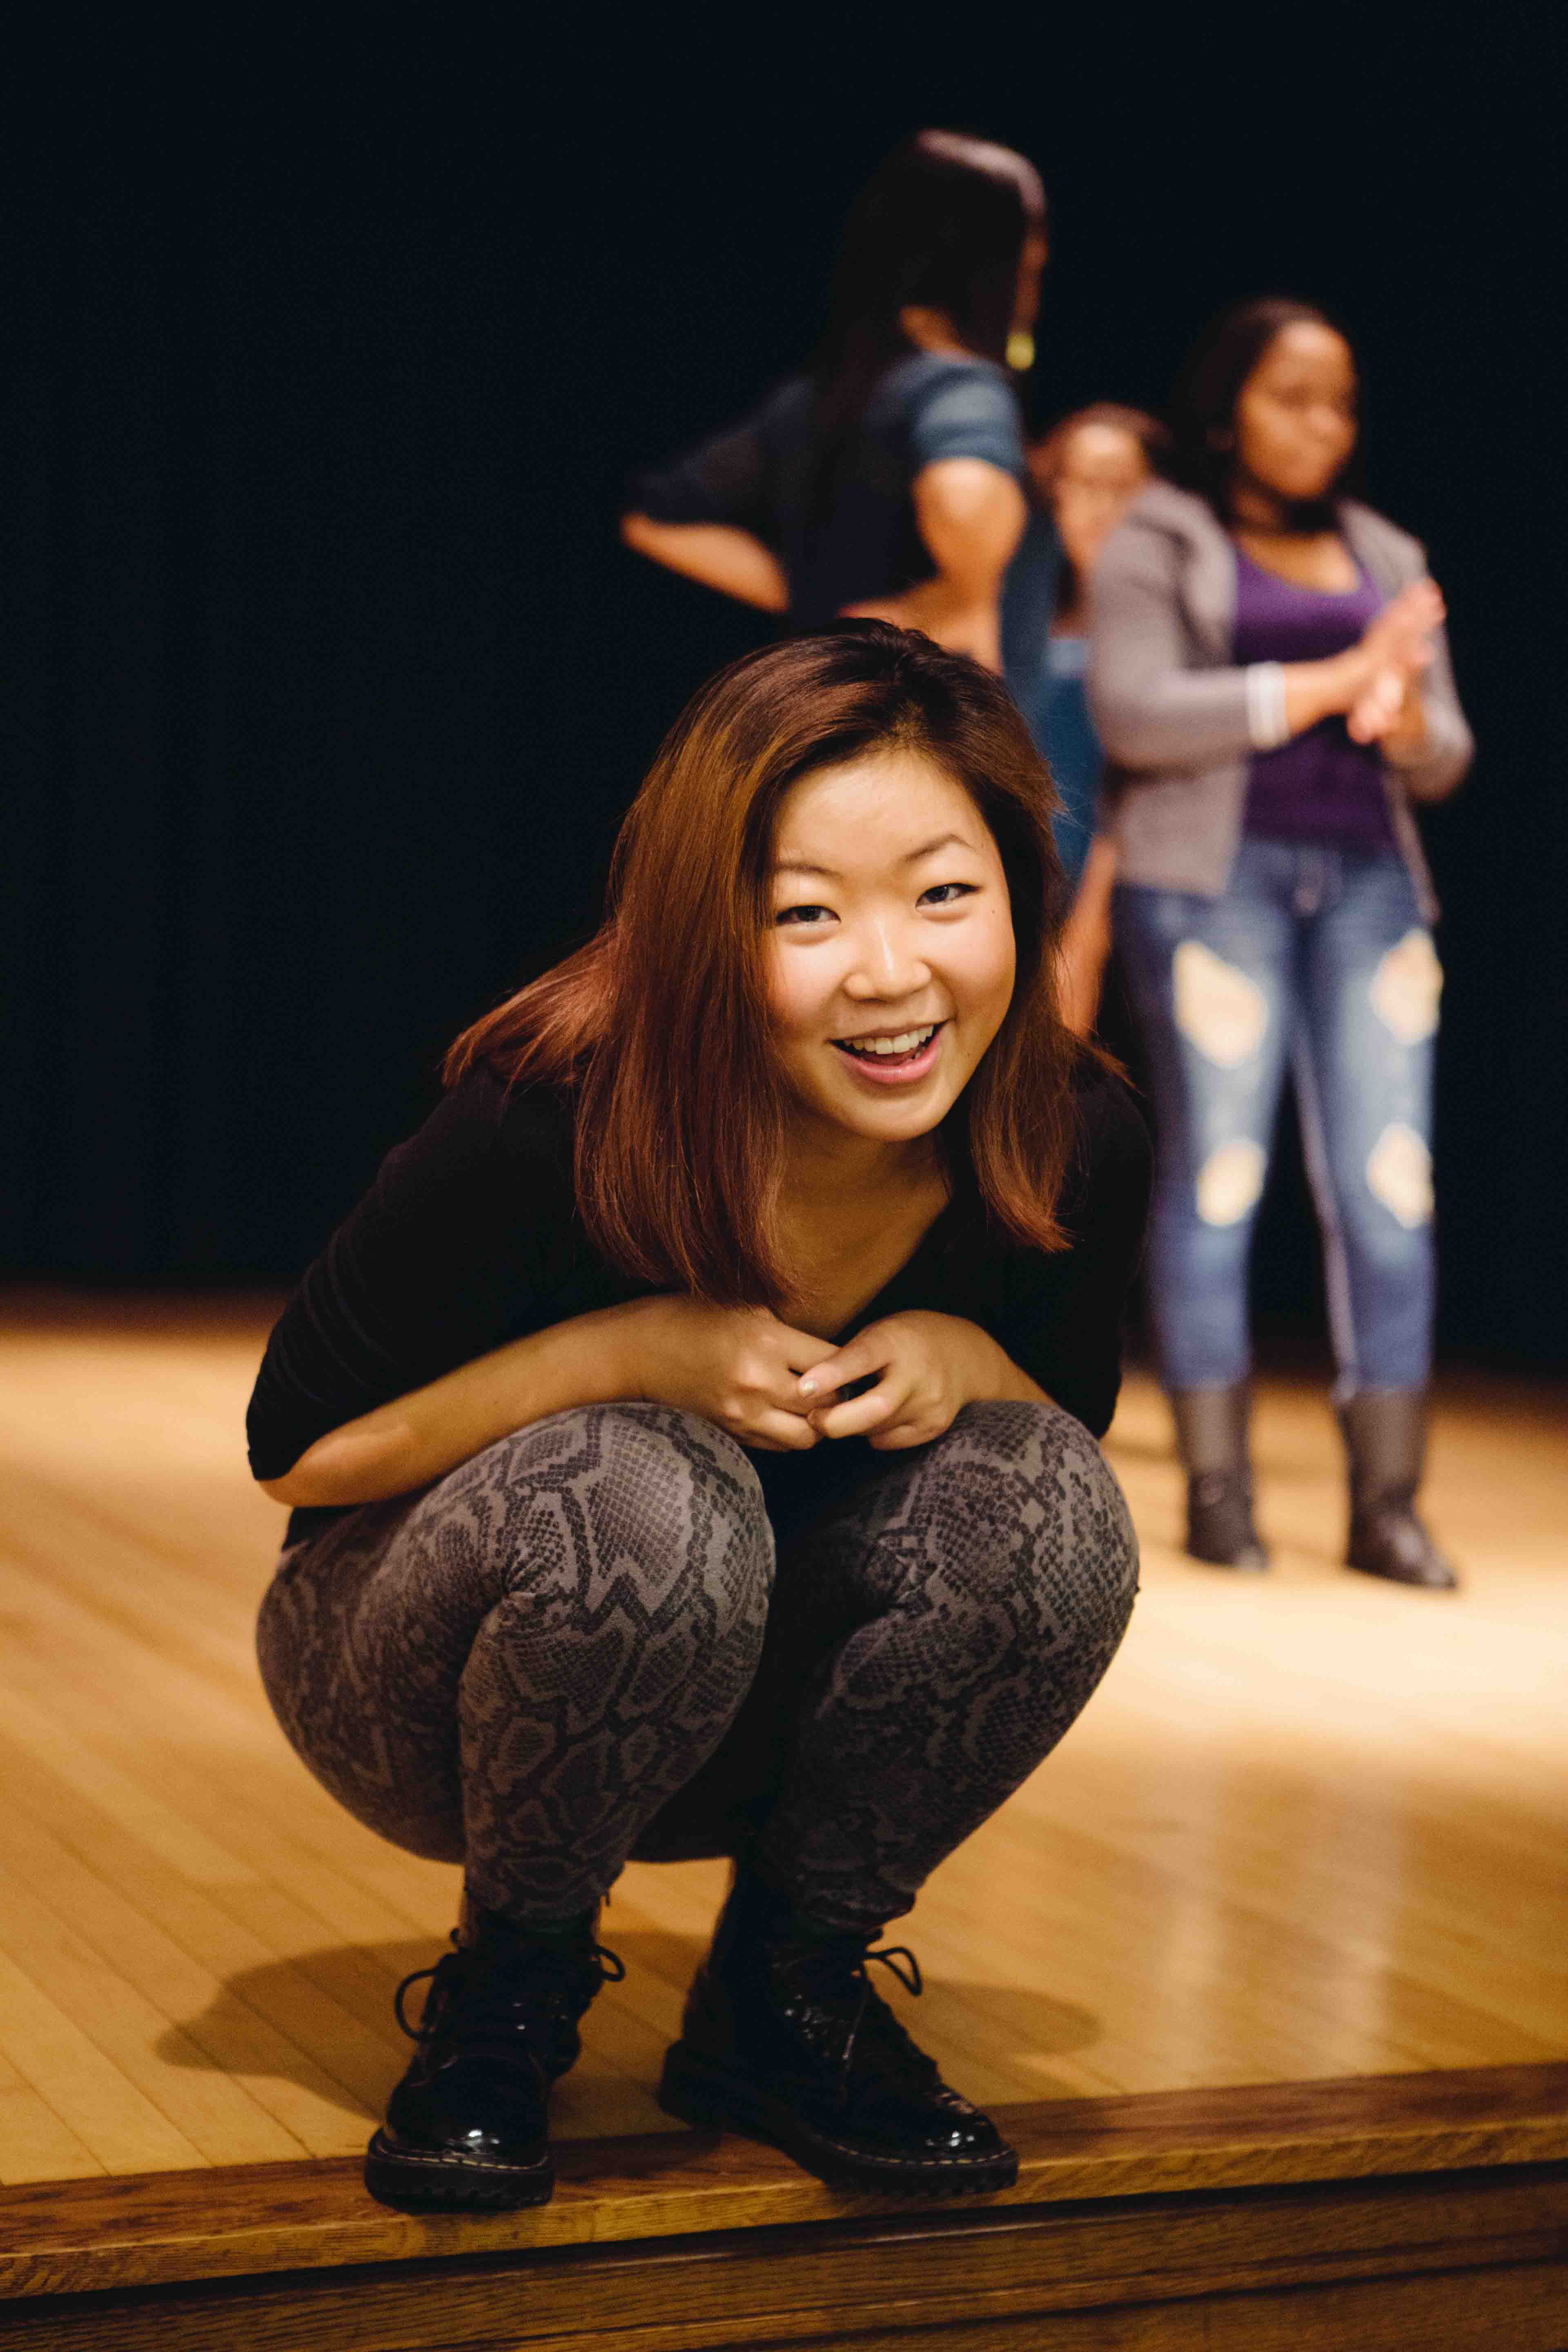 College student laughing on stage in campus theater.